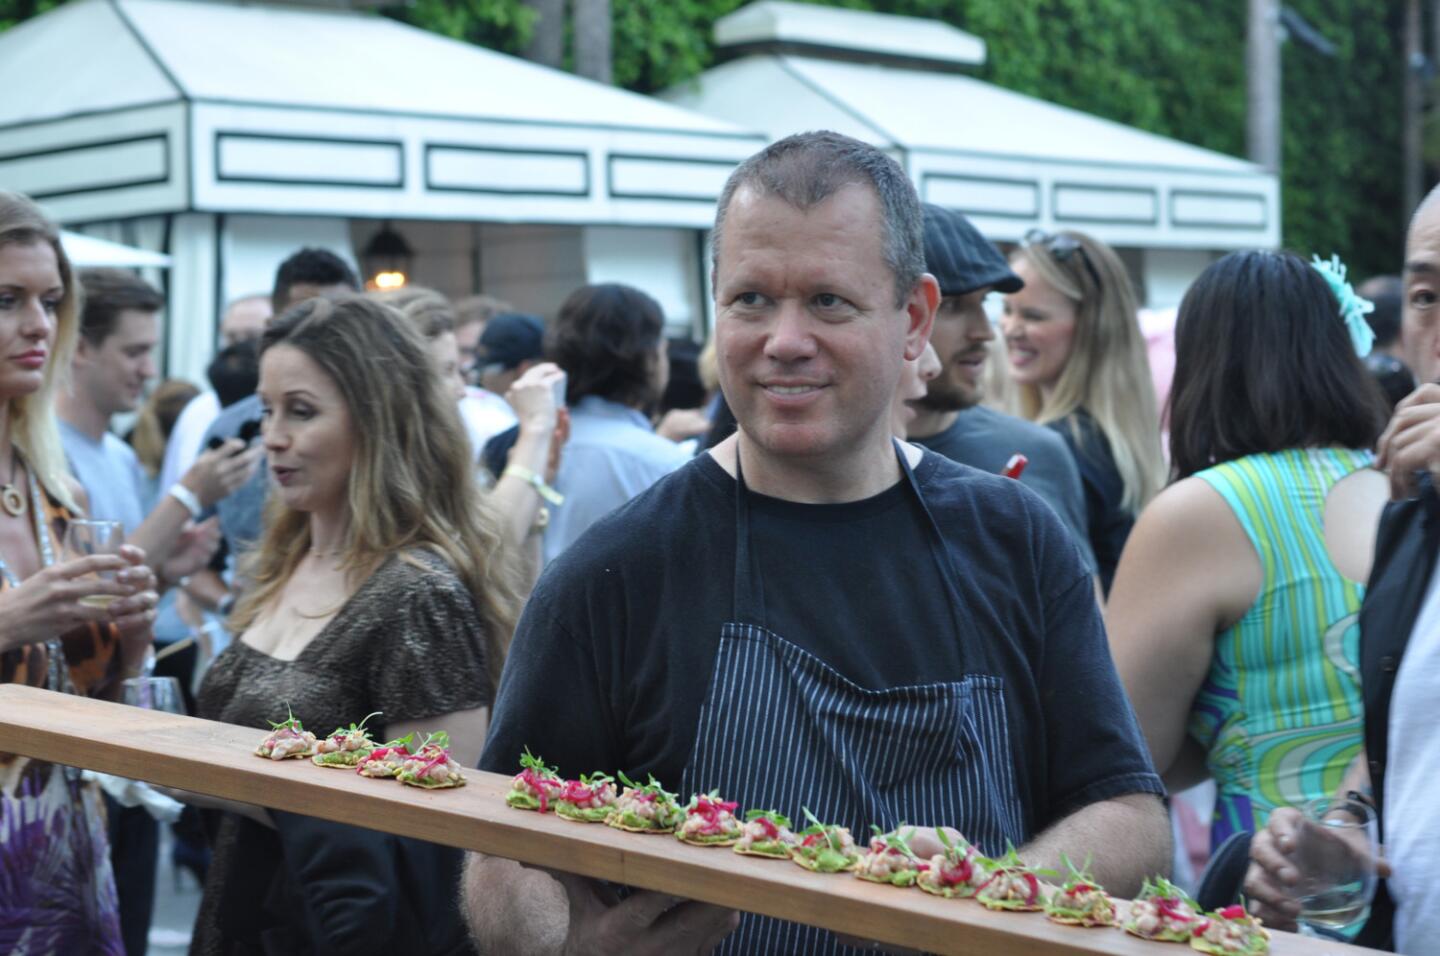 Chef Walter Manzke of Republique, who won top honors this year.